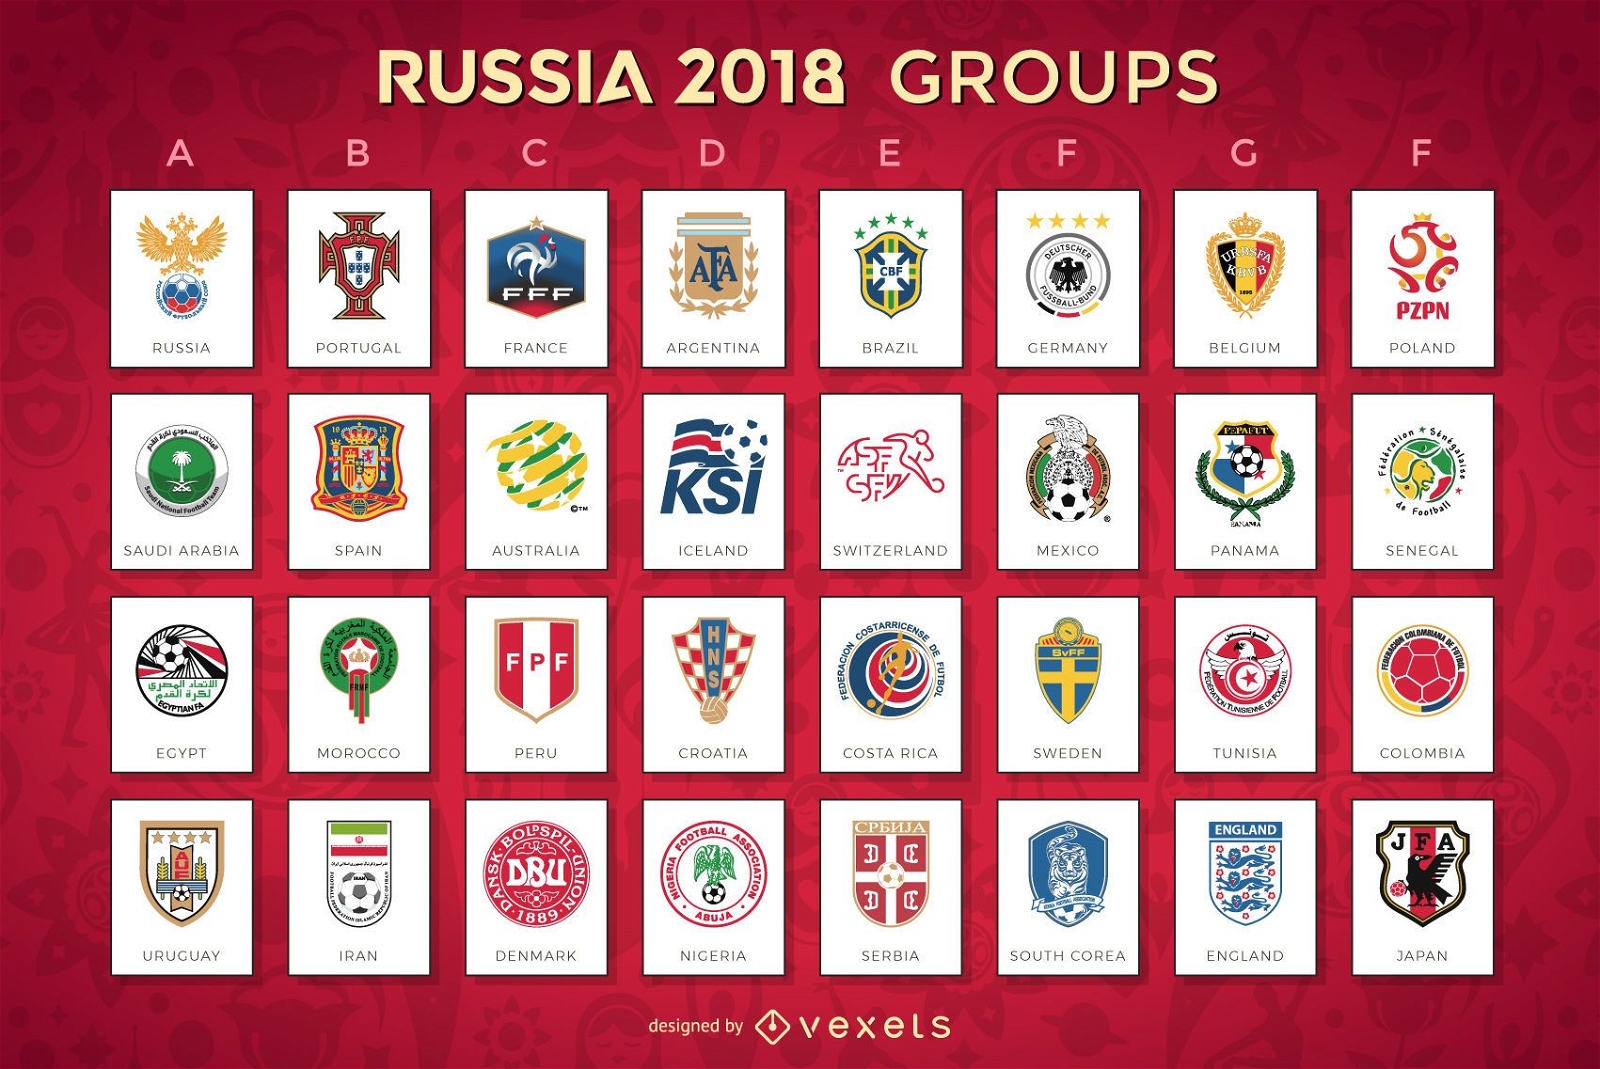 Russia 2018 groups with emblems